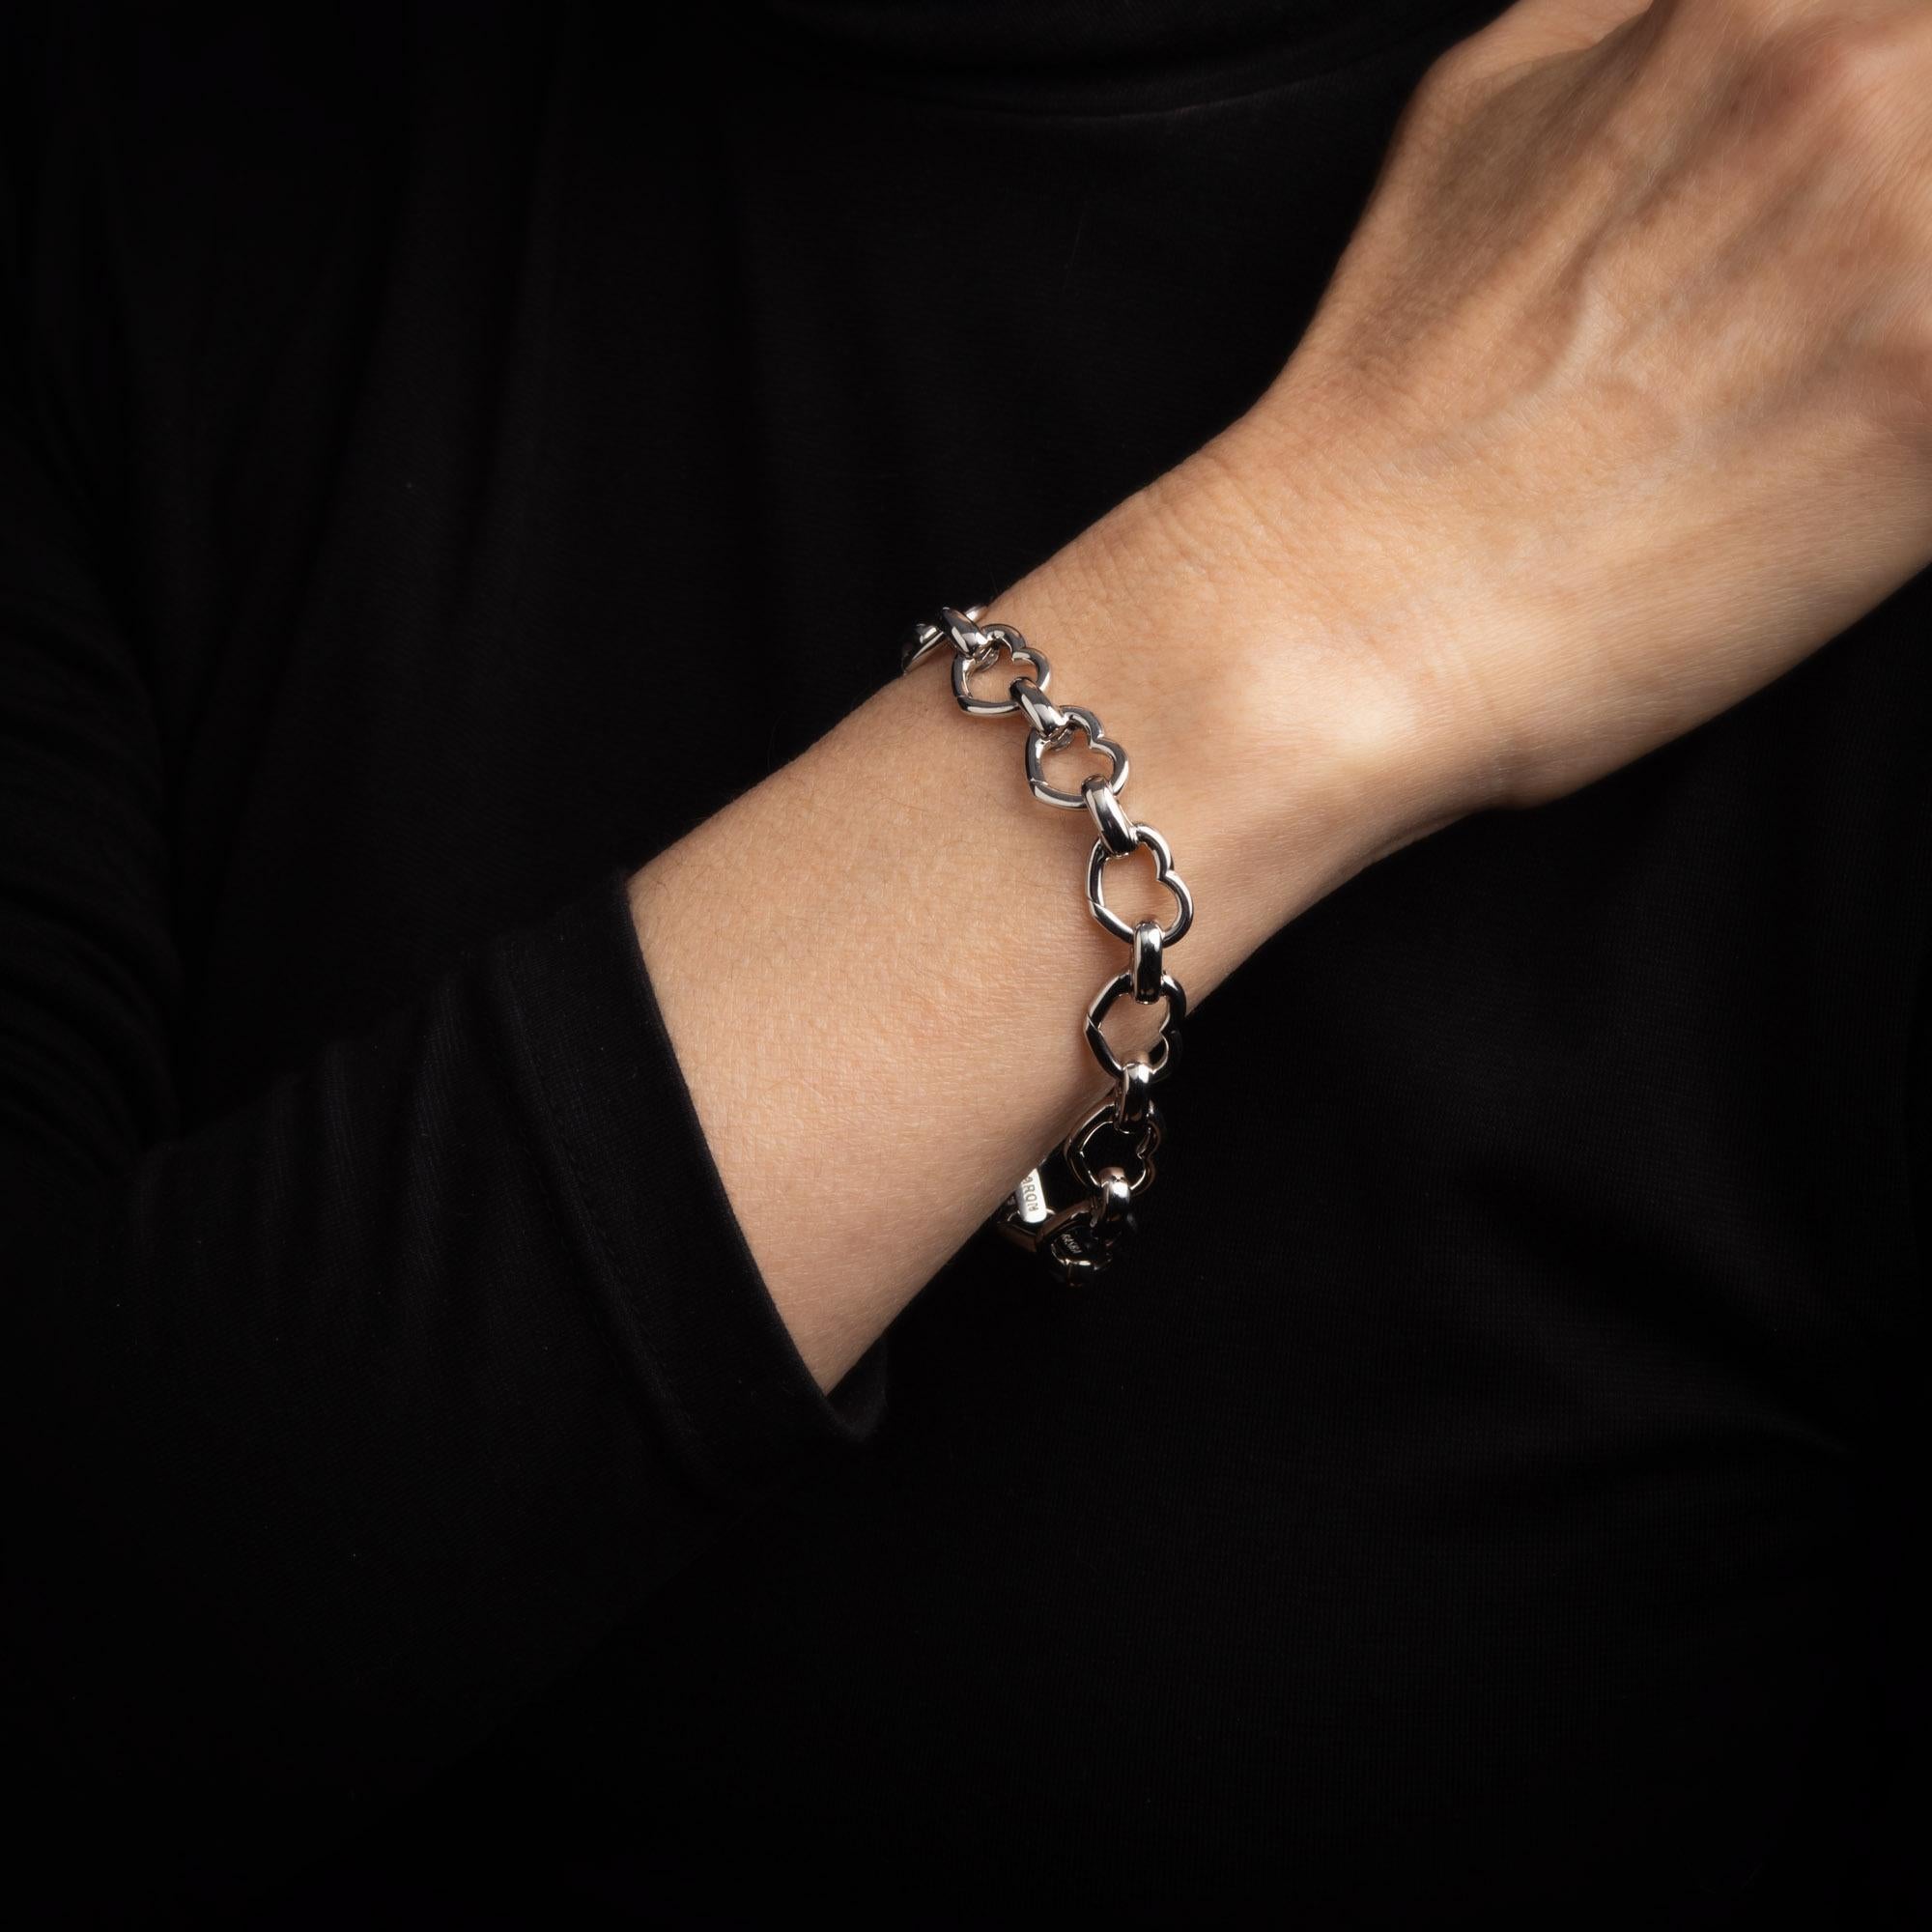 Stylish and finely detailed Aaron Basha bracelet crafted in 18k white gold. 

The bracelet makes a great statement on the wrist. Each of the heart links features an invisible slip closure that allows for the addition of charms to every link if